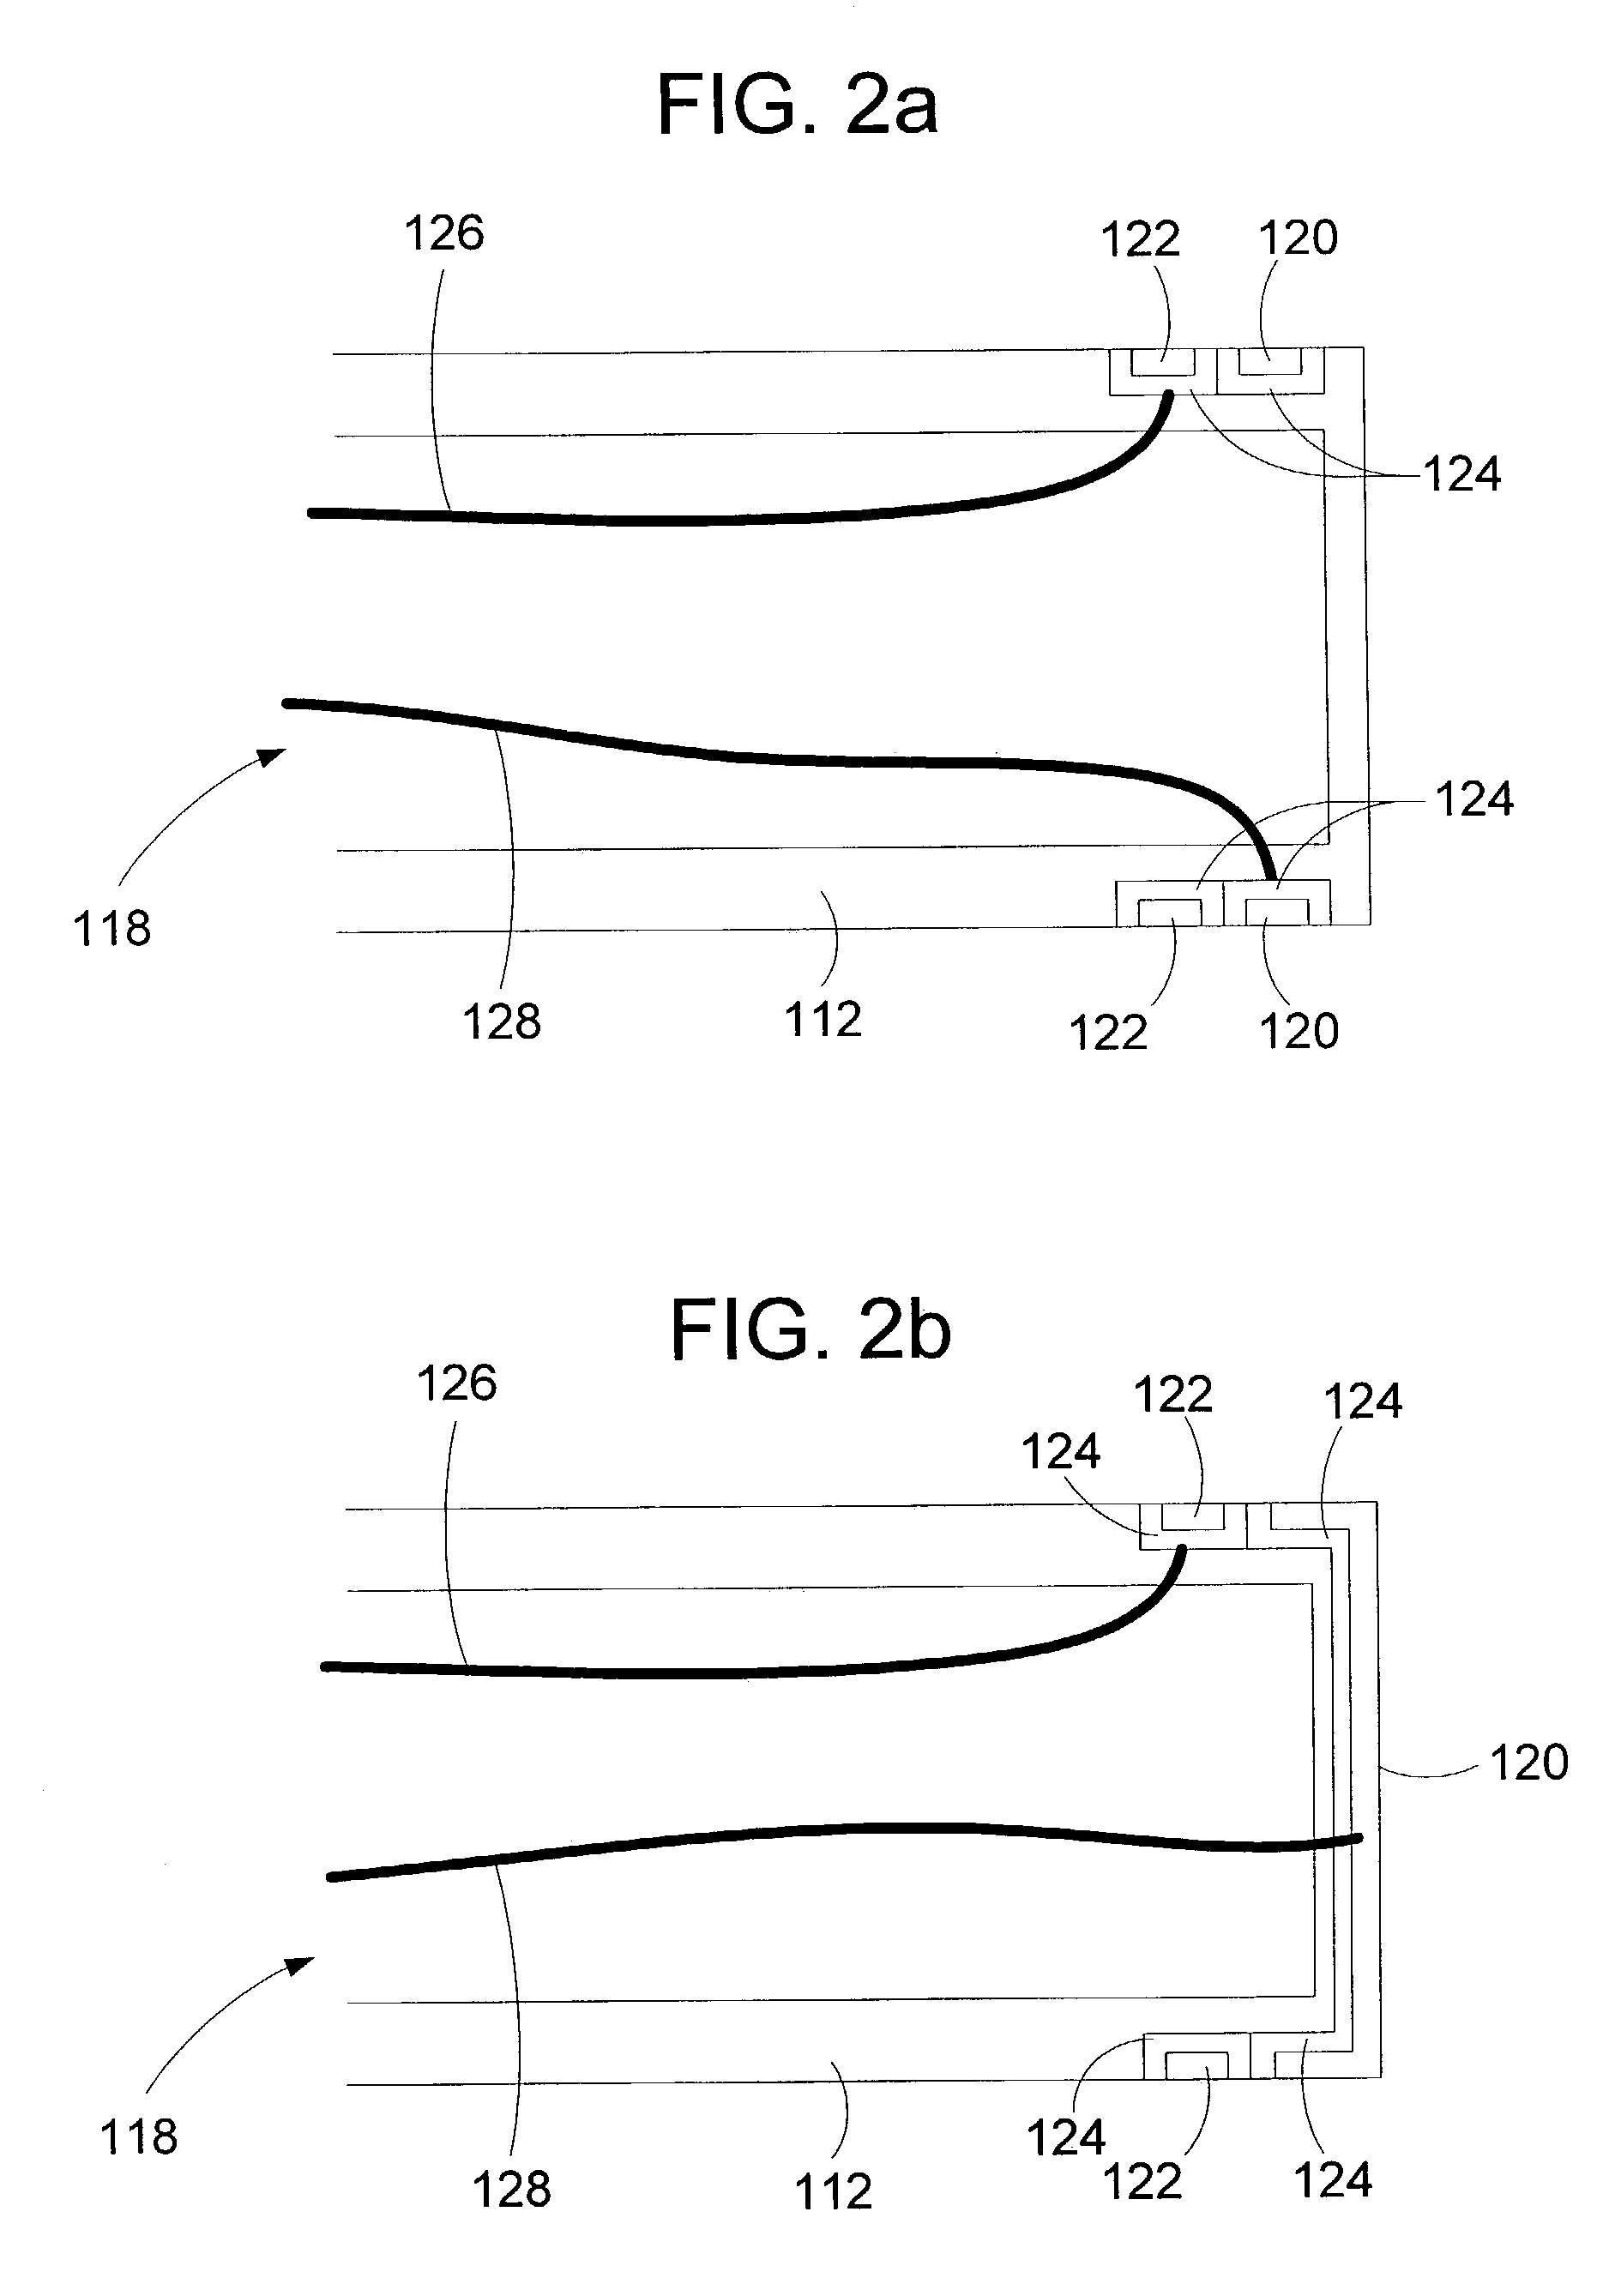 Method and apparatus for detecting combustion instability in continuous combustion systems